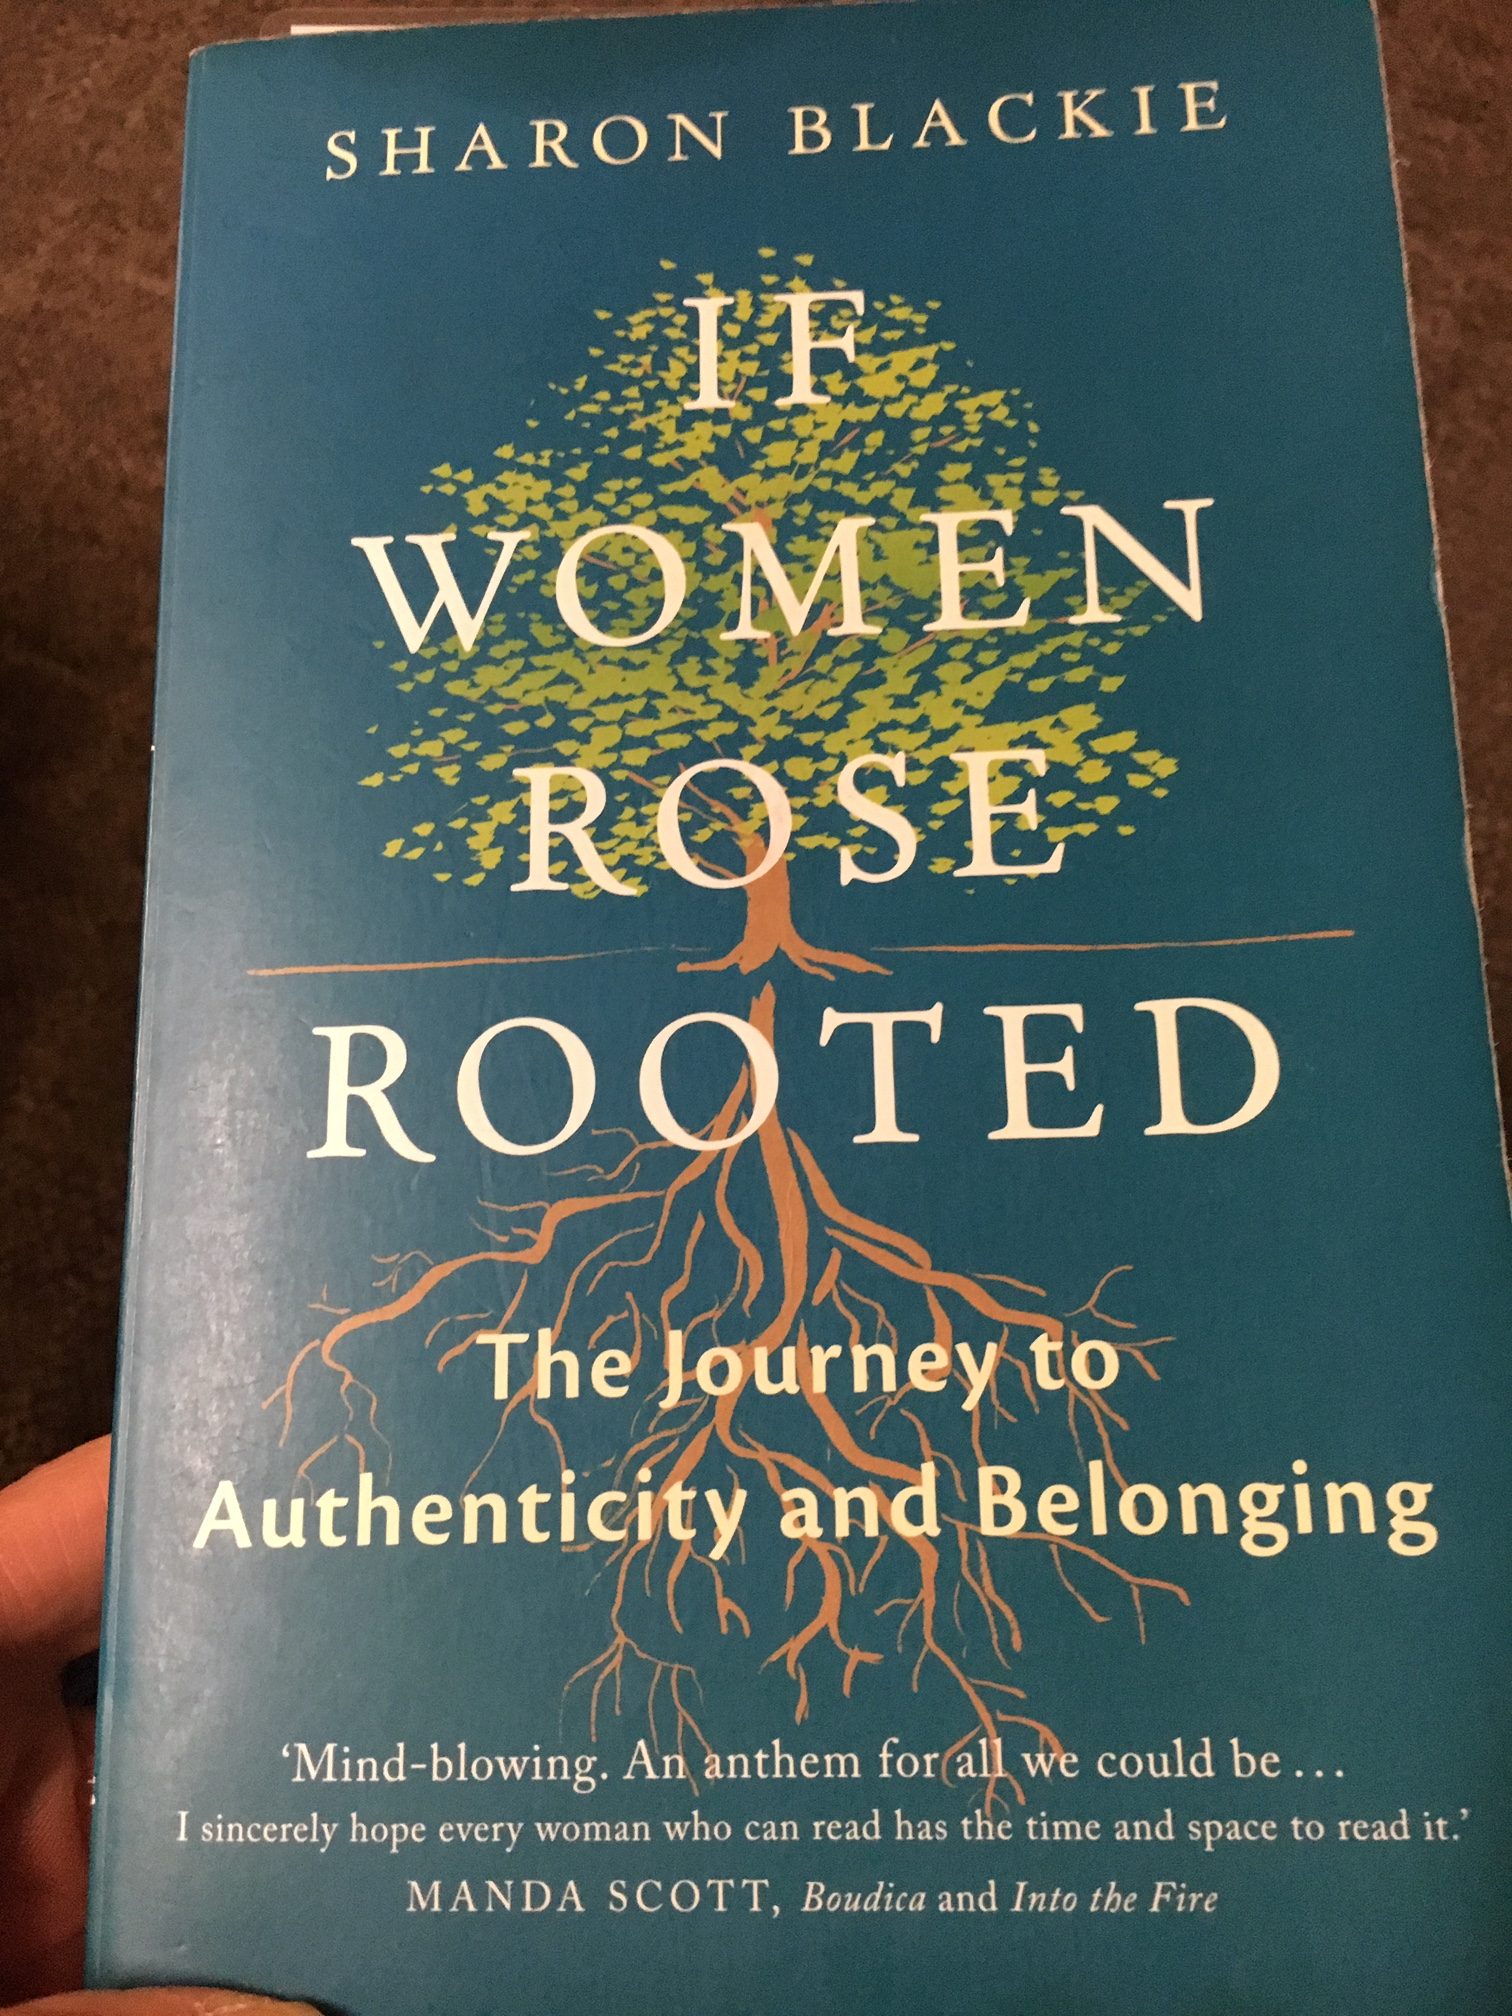 if women rose rooted